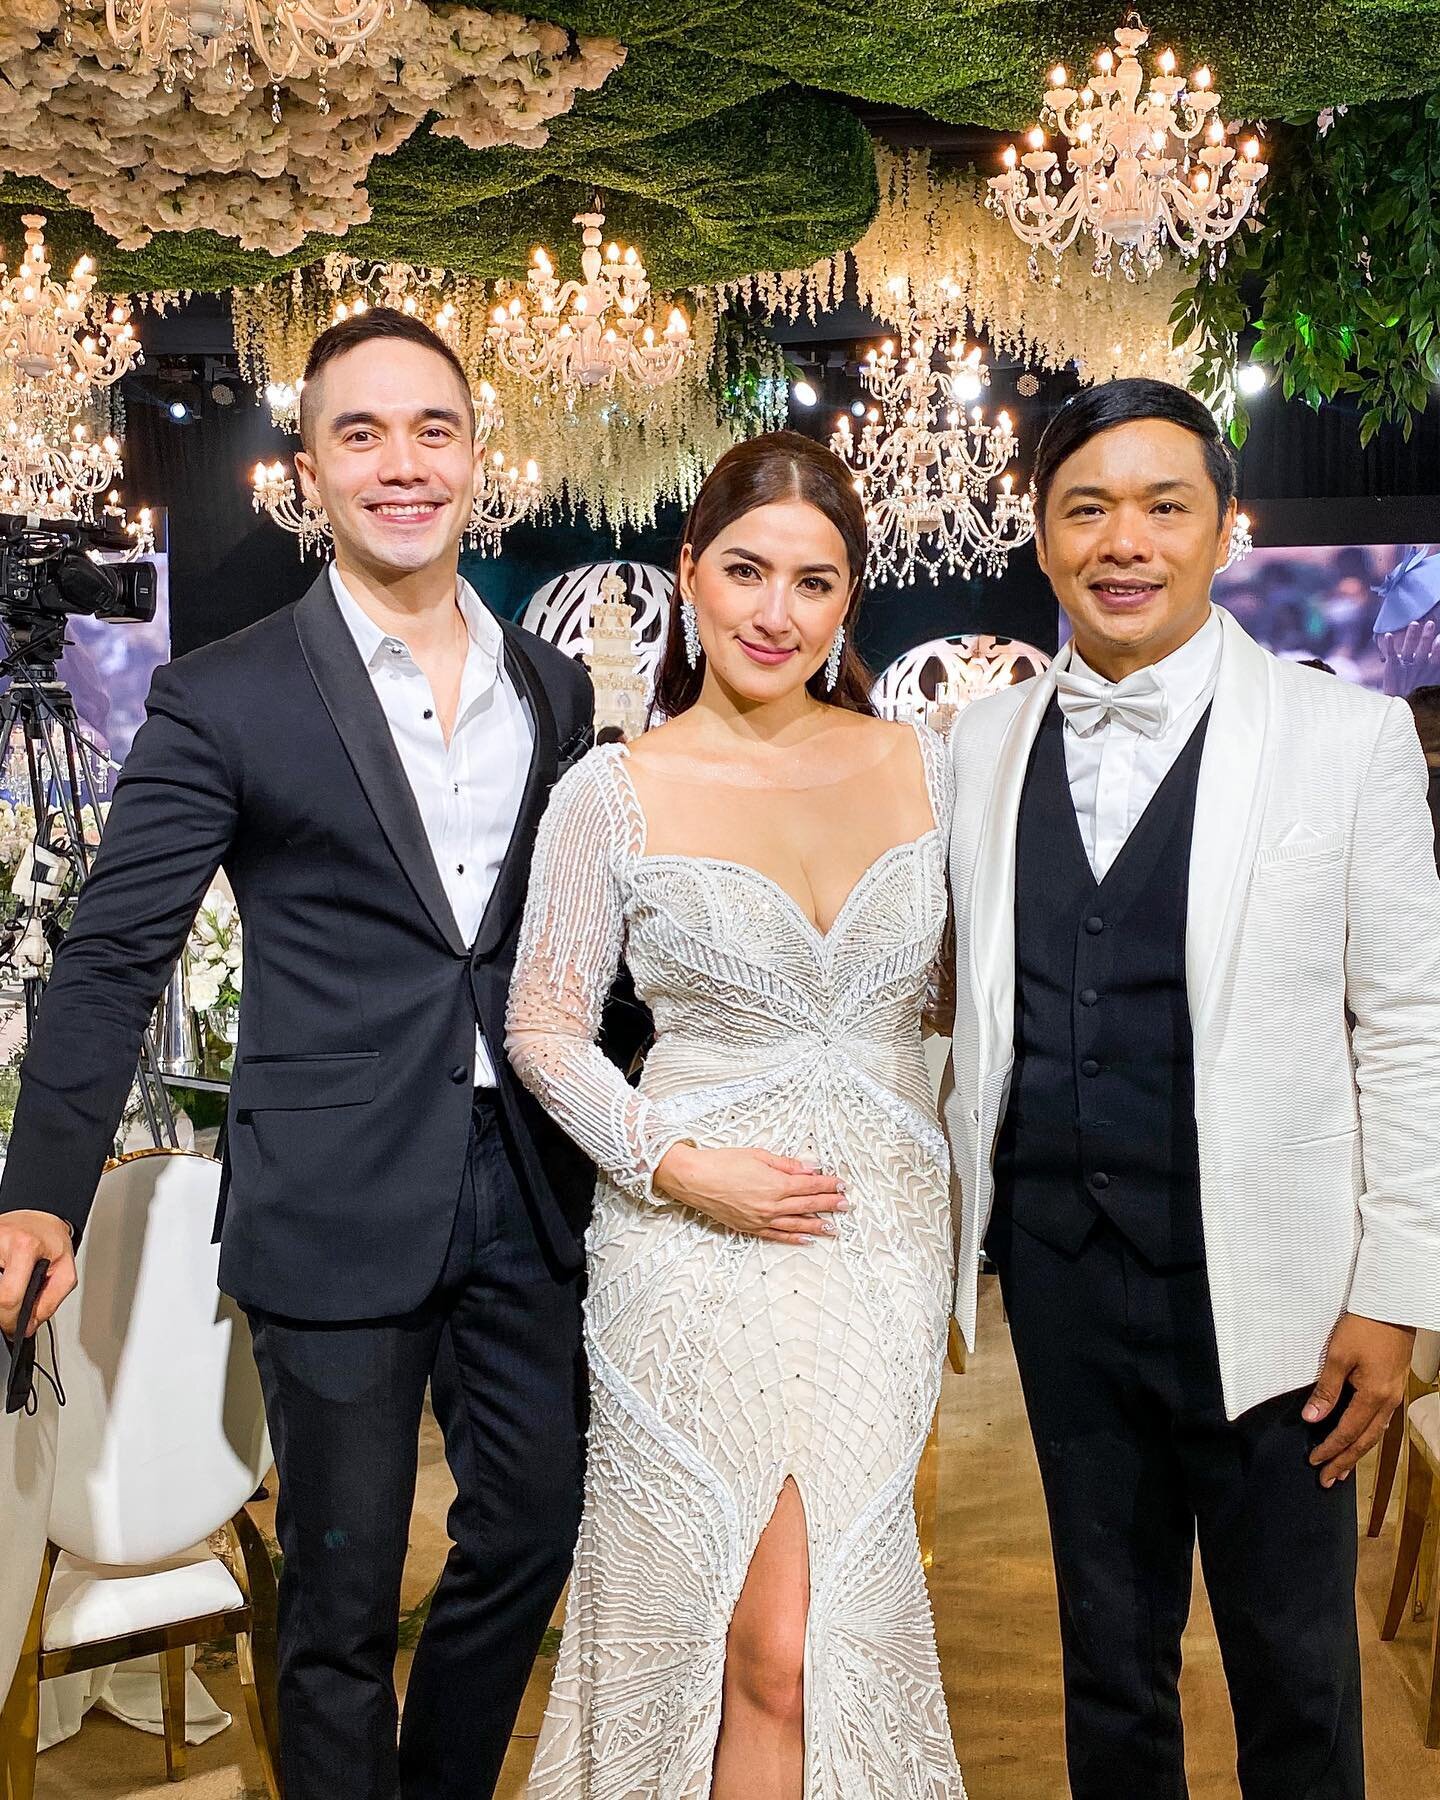 Hindi artista si Dave, but now he&rsquo;ll be Ara Mina&rsquo;s leading man, for a lifetime. ✨What a celebration of love! Puno ng iyakan, tawanan, at kantahan. Thank you @davealmarinez and @therealaramina for having me host such an epic reception. Off